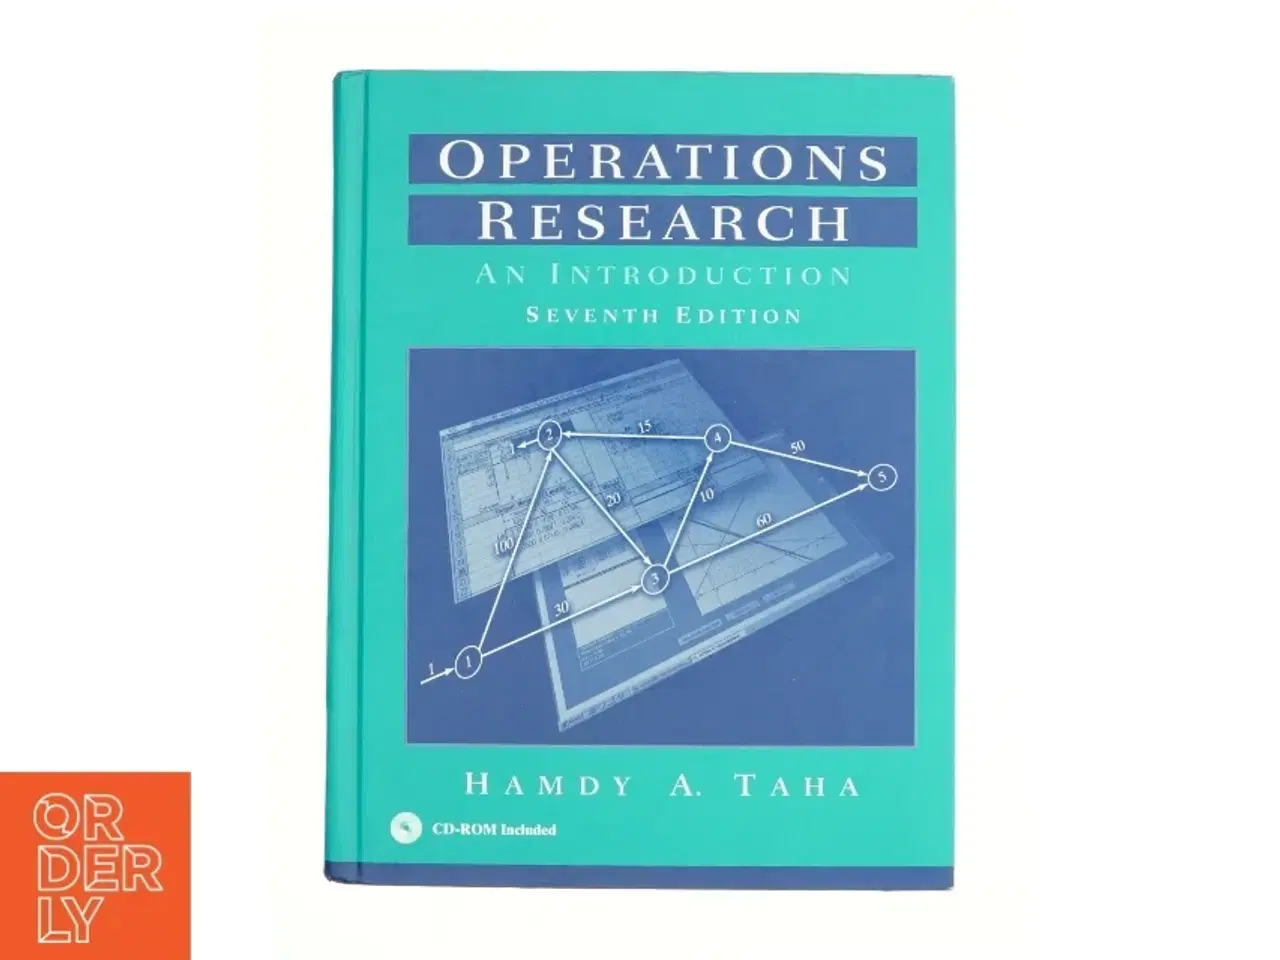 Billede 1 - Operations Research : an Introduction by Hamdy a. Taha af Hamdy A. Taha (Bog)